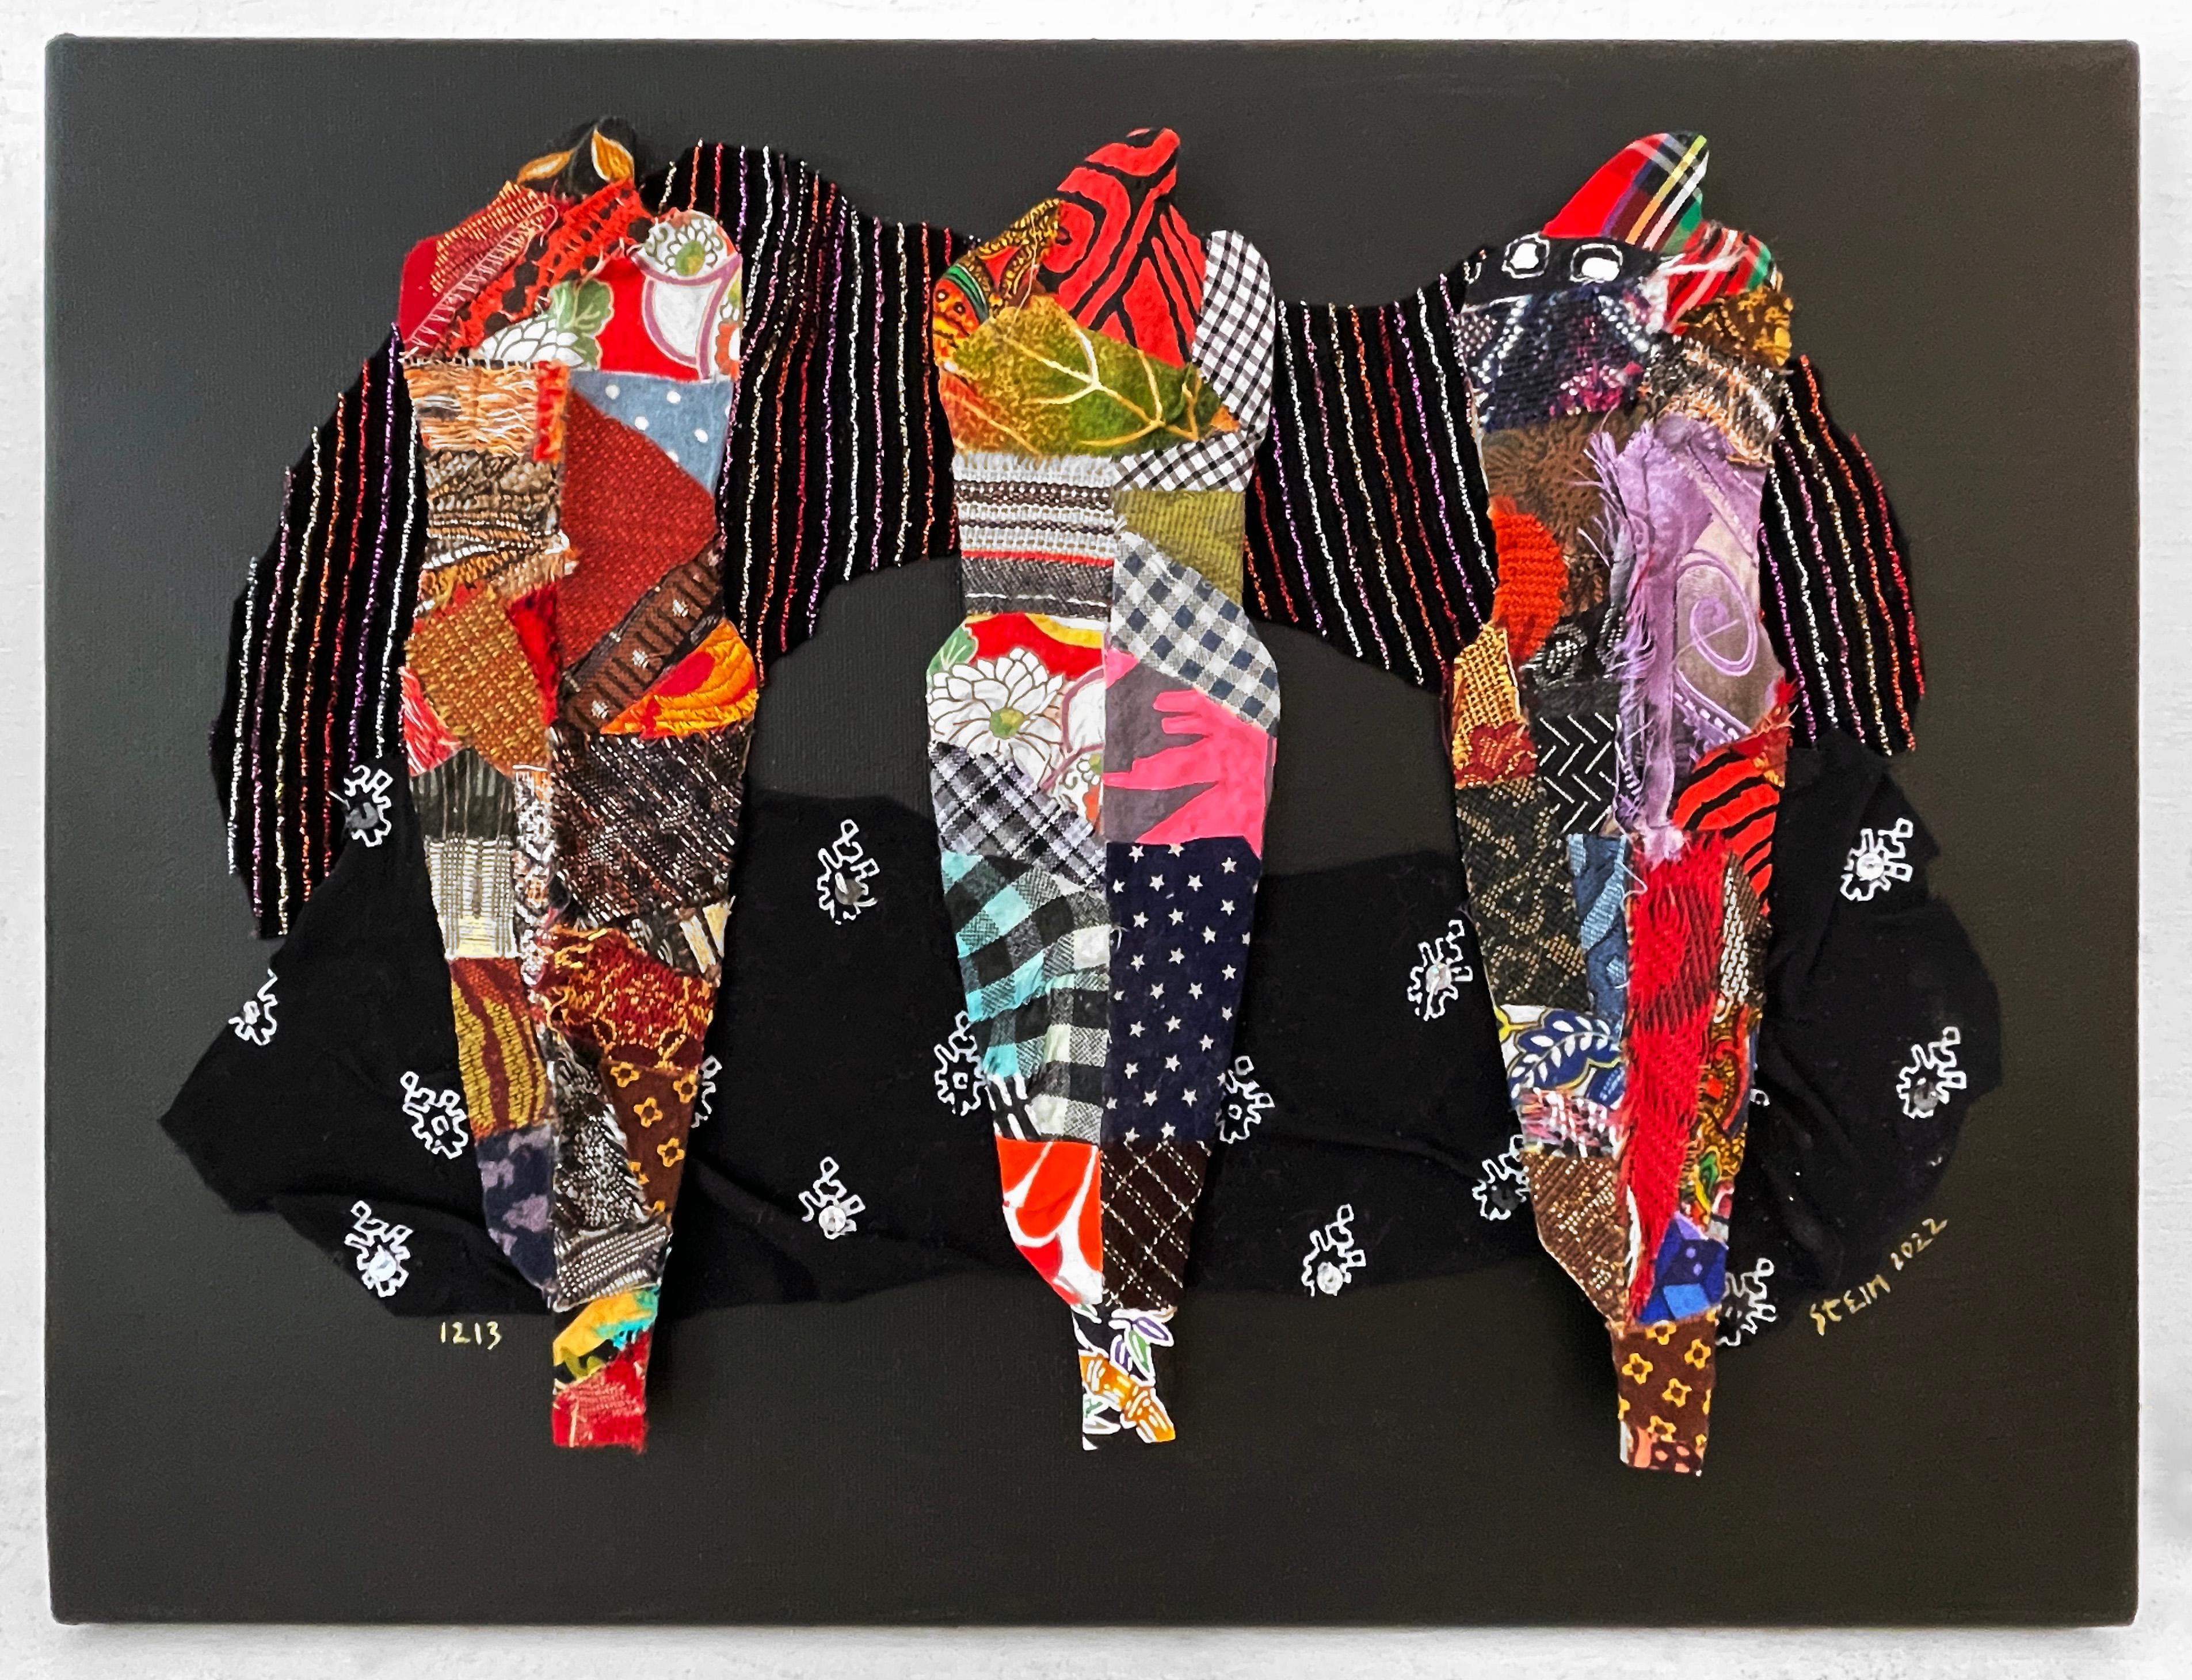 Linda Stein, 1213 - Contemporary Art 3D Mixed Media Fabric Sculptural Collage